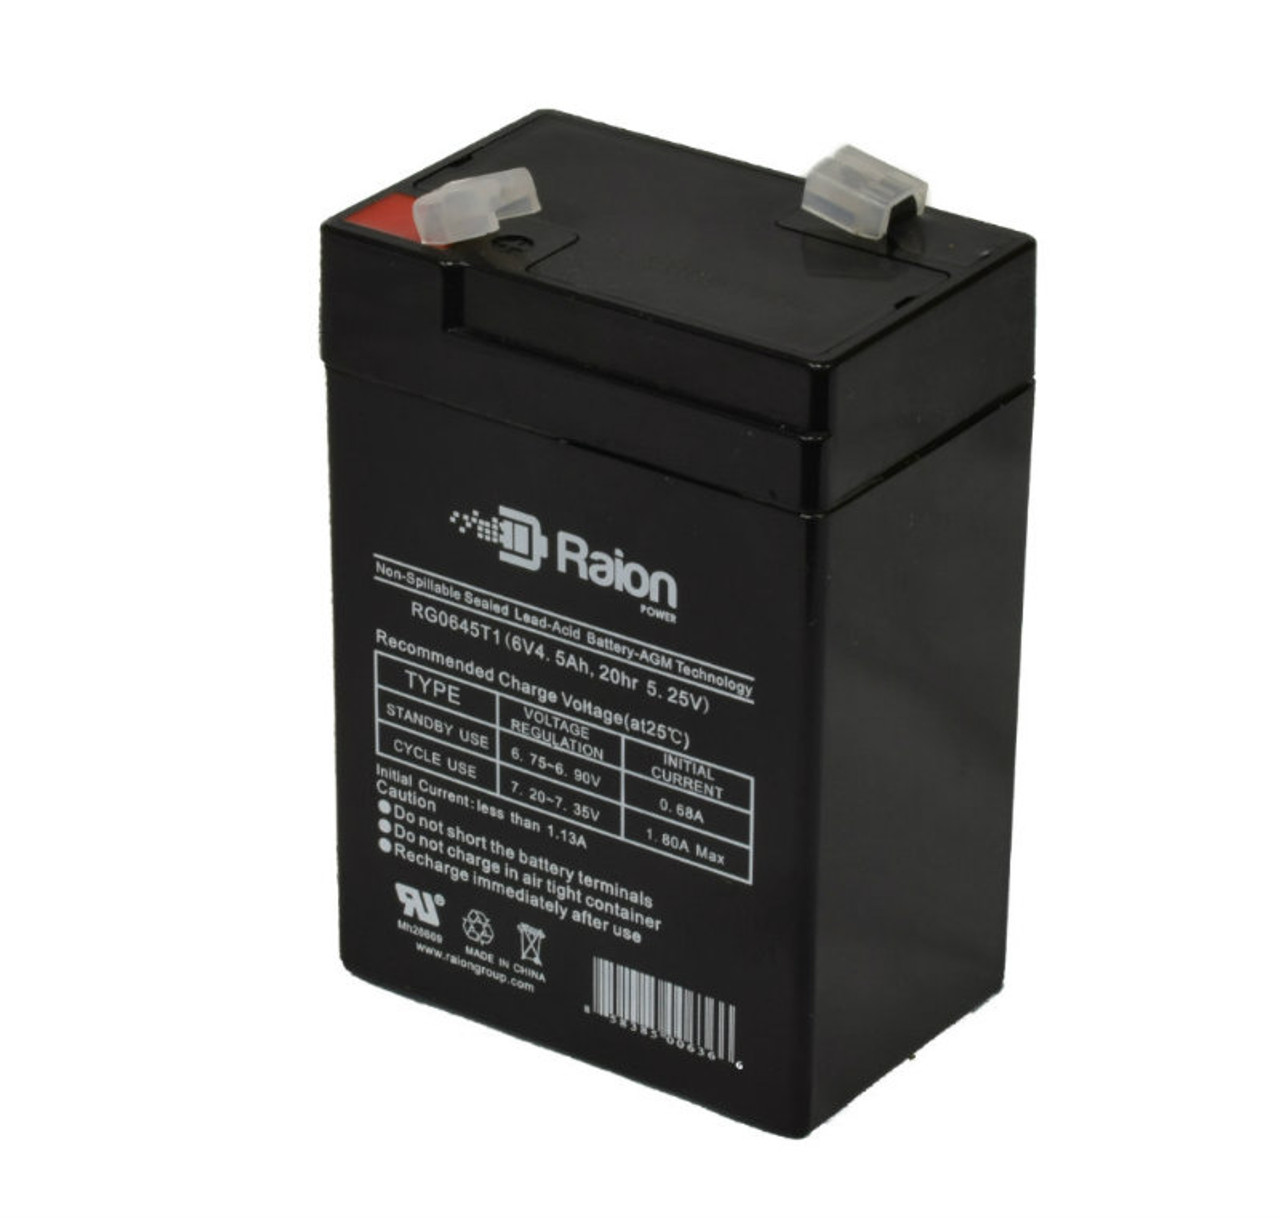 Raion Power RG0645T1 6V 4.5Ah Replacement Battery Cartridge for Orion Skin Analyzer